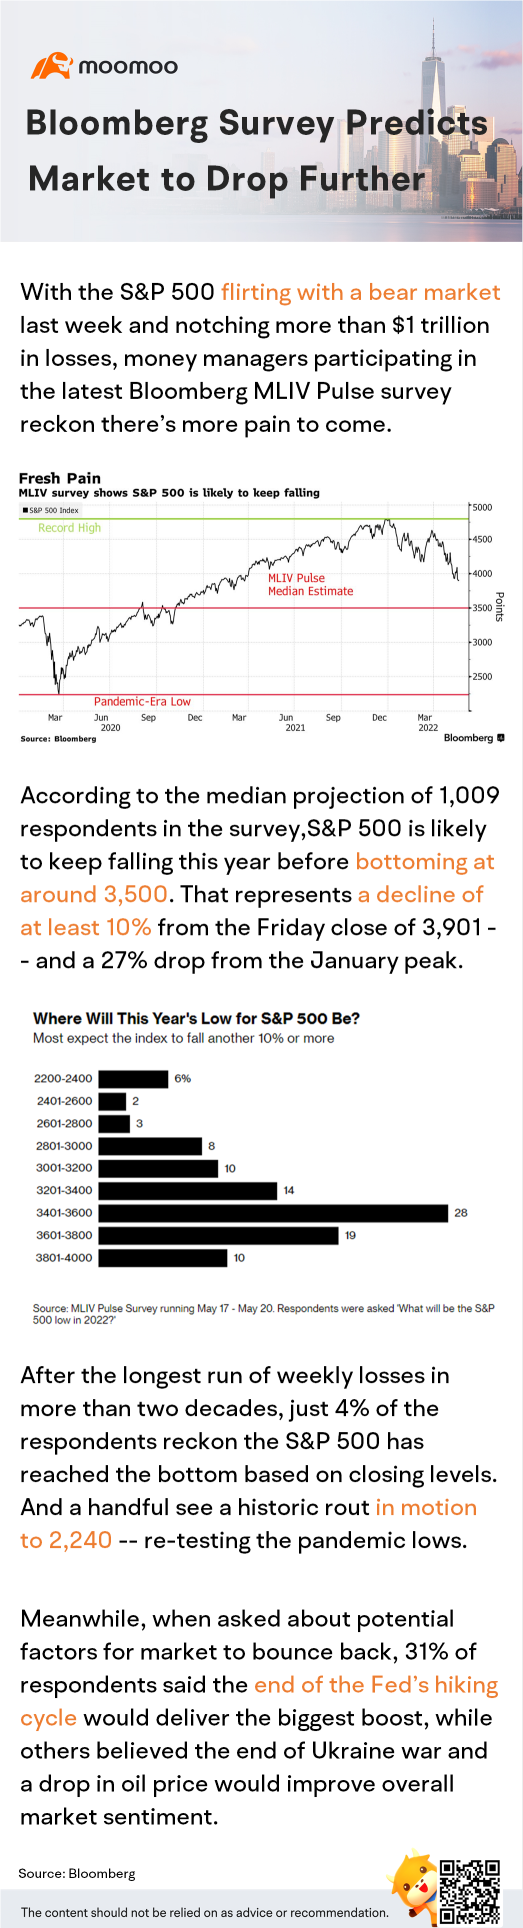 Bloomberg survey predicts market to drop further